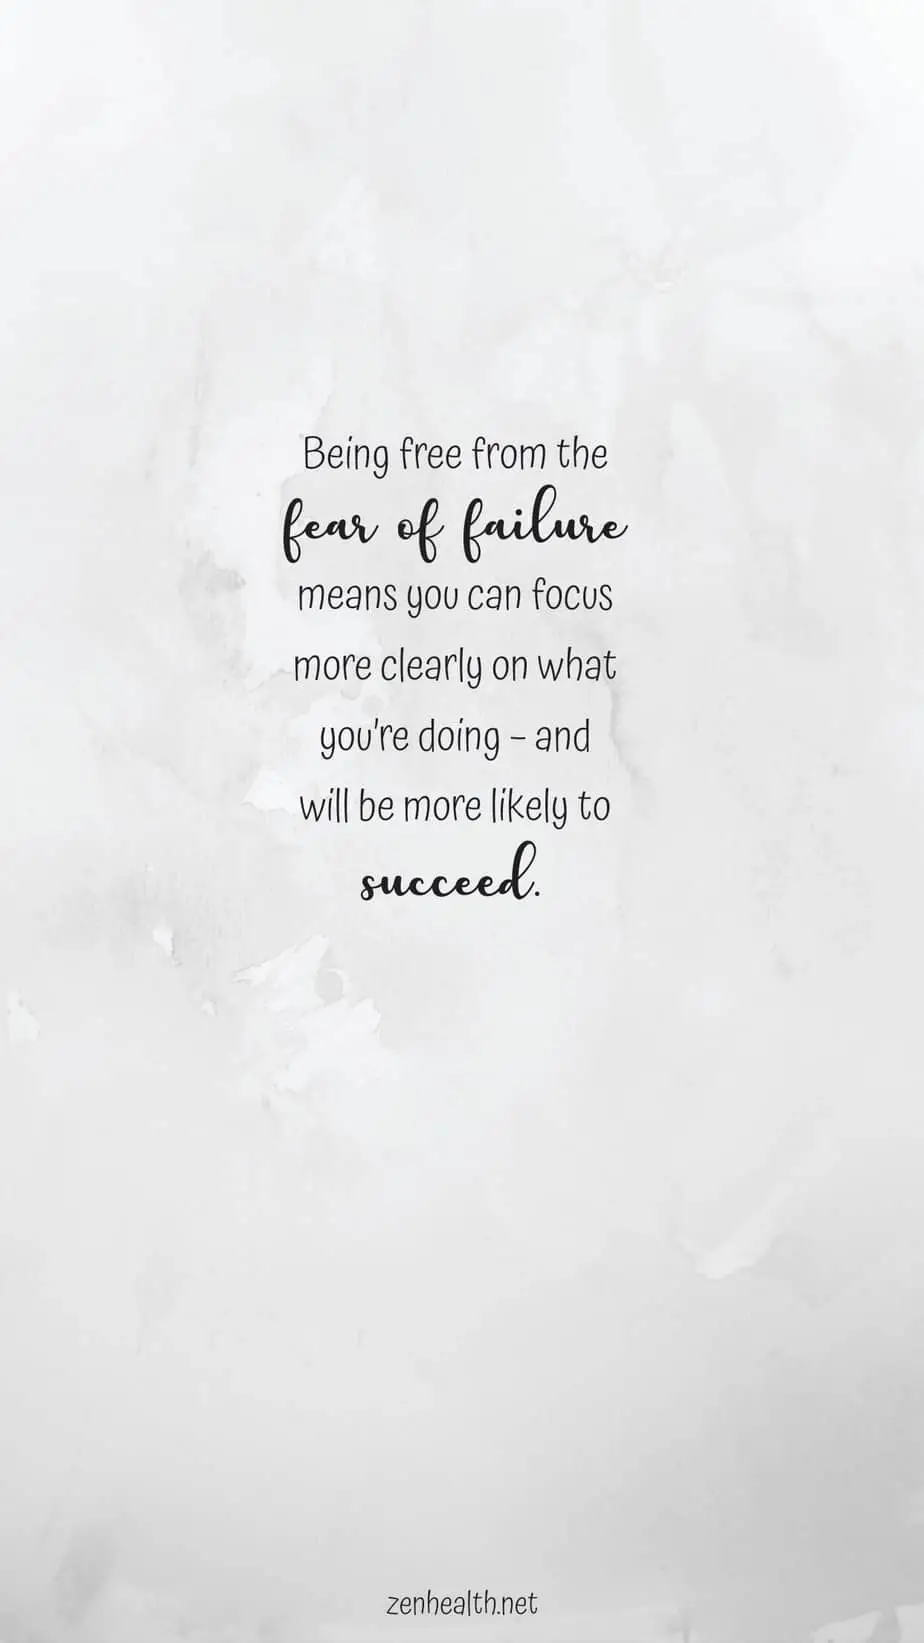 Quote: Being free from the fear of failure means you can focus more clearly on what you’re doing – and will be more likely to succeed.